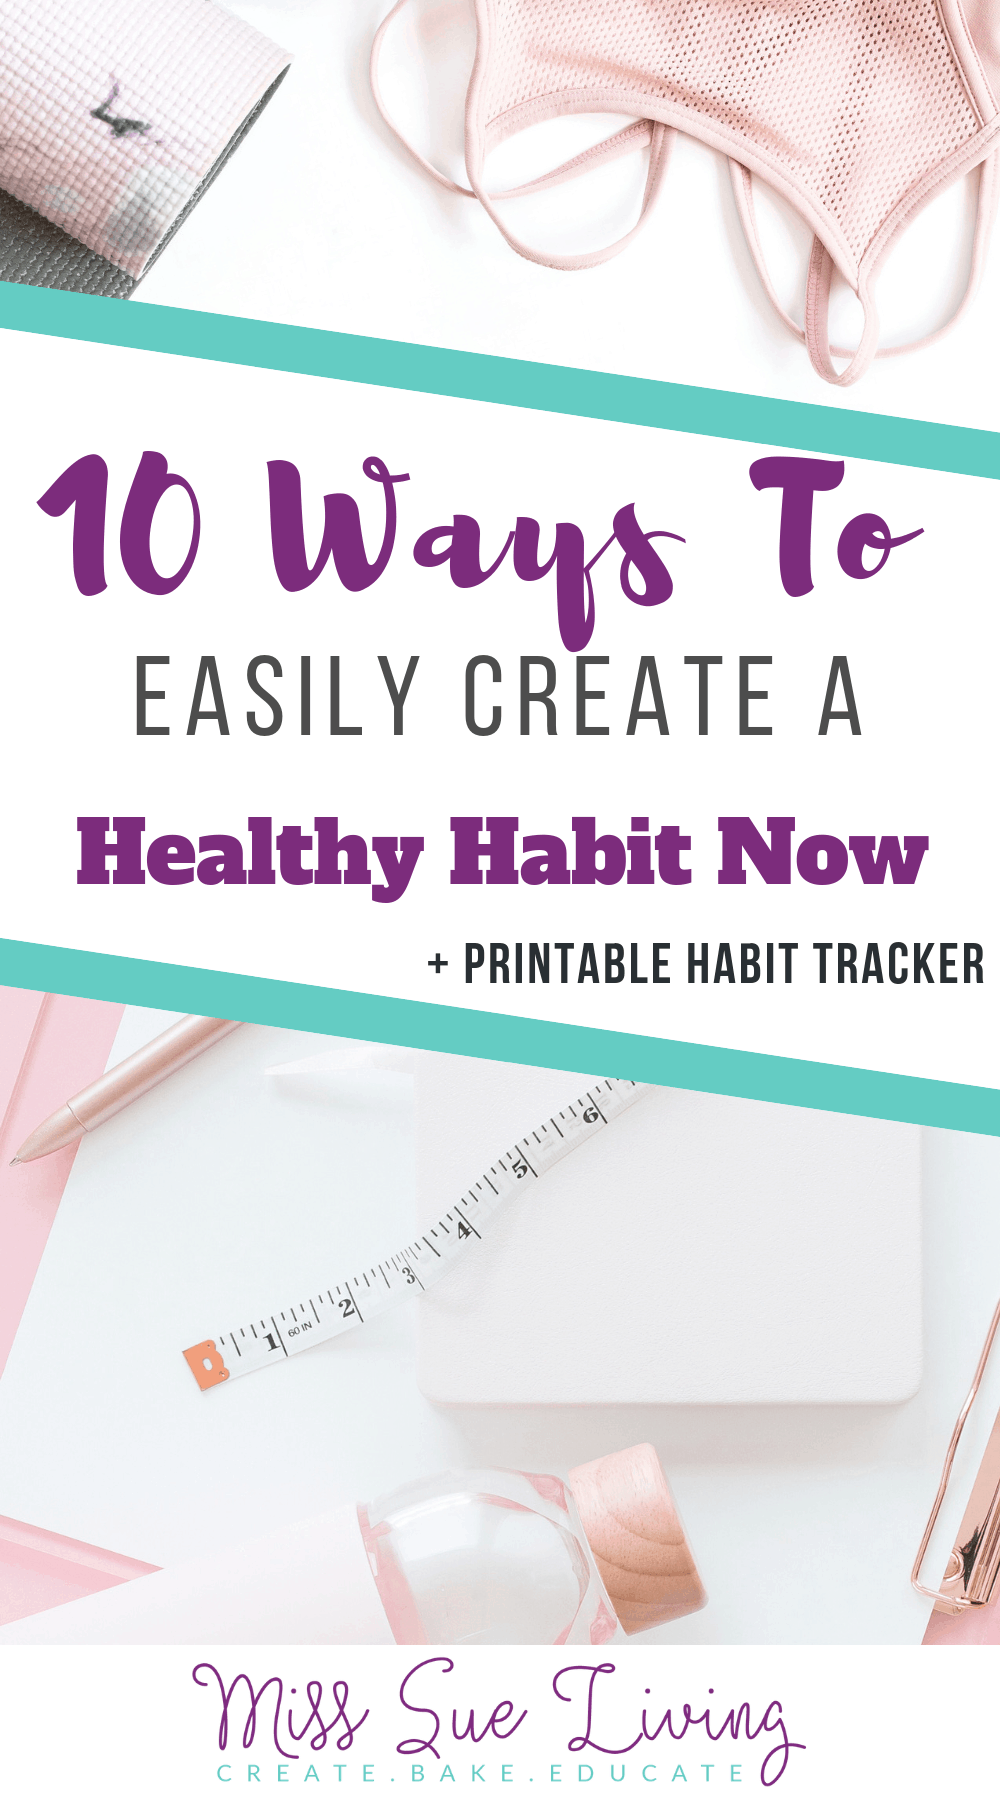 how to create healthy habits, developing healthy habits for life, creating healthy habits, how to form healthy habits, healthy habits articles, healthy lifestyle habits, healthy habits, how to create healthy habits tips, how to create healthy habits that stick, #healthyhabits #personalgrowth #habits #dailyhabits #routines #dailyroutines